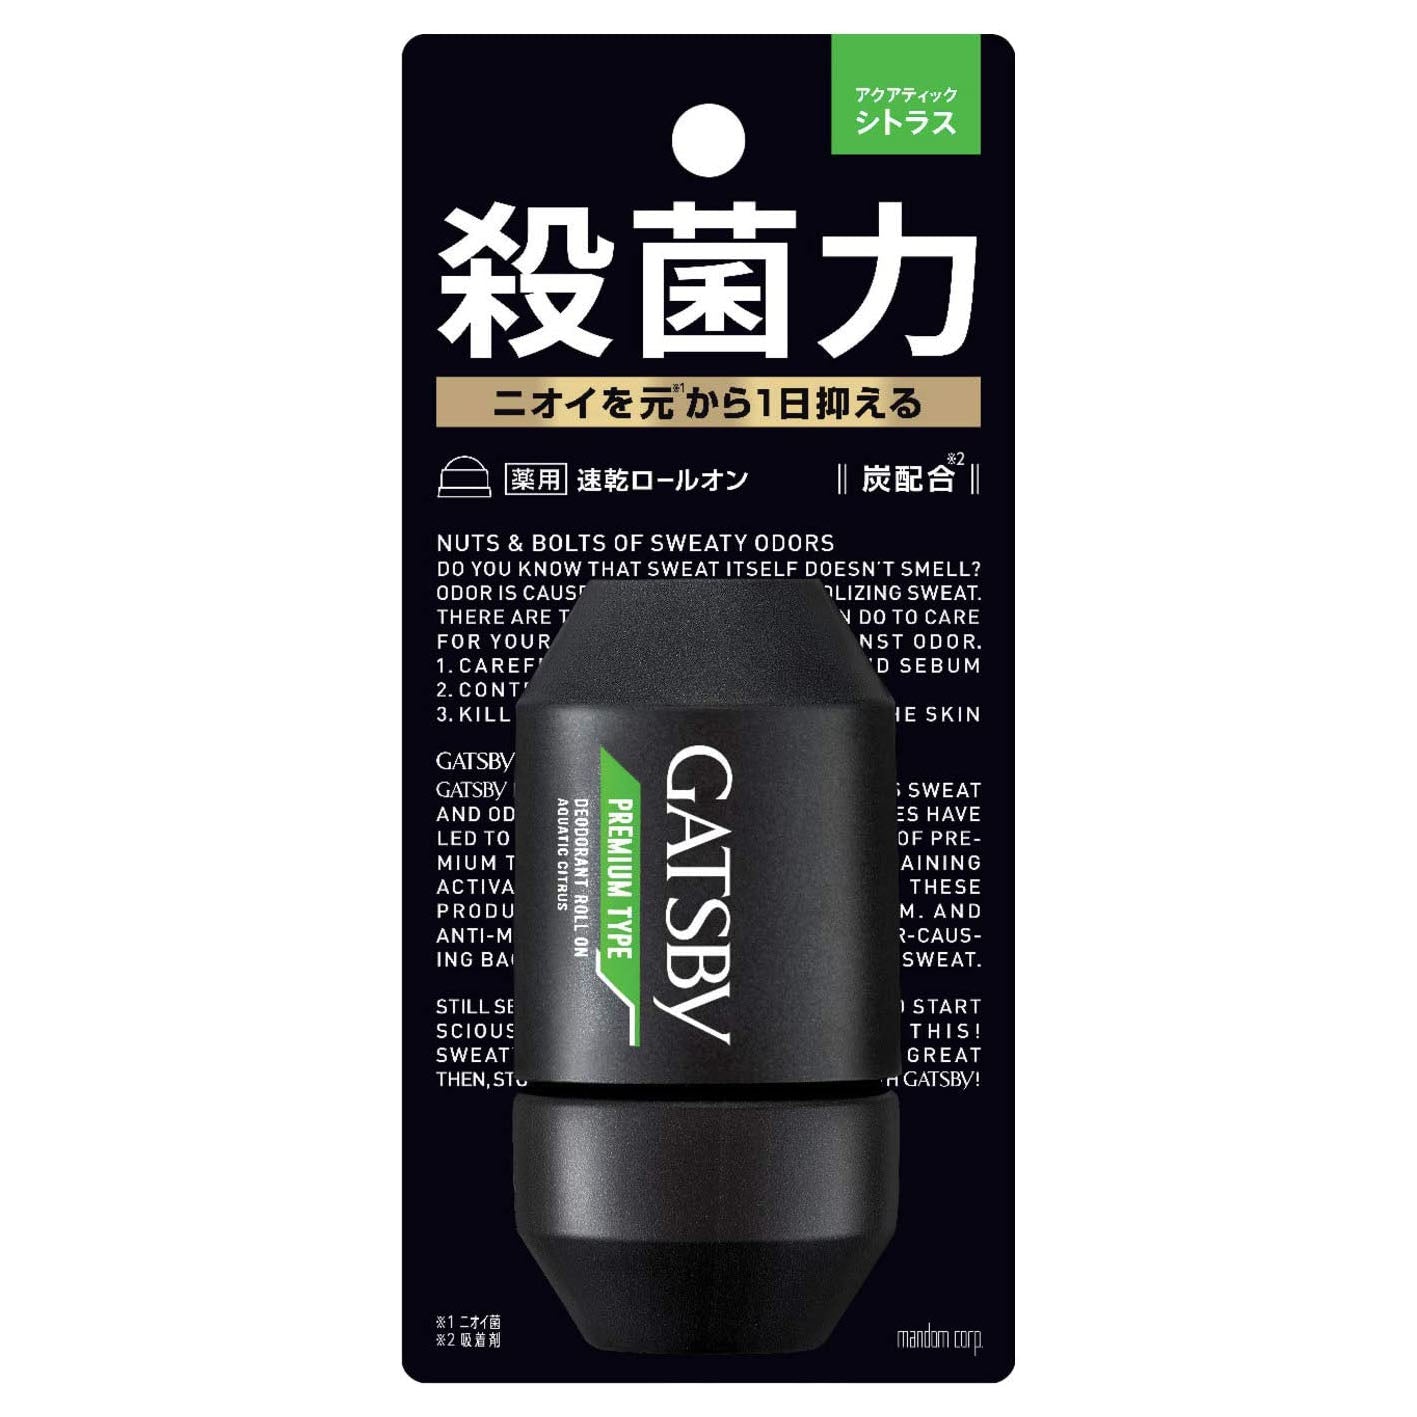 Gatsby Premium Type Deodorant Roll-on - 60ml - Harajuku Culture Japan - Japanease Products Store Beauty and Stationery